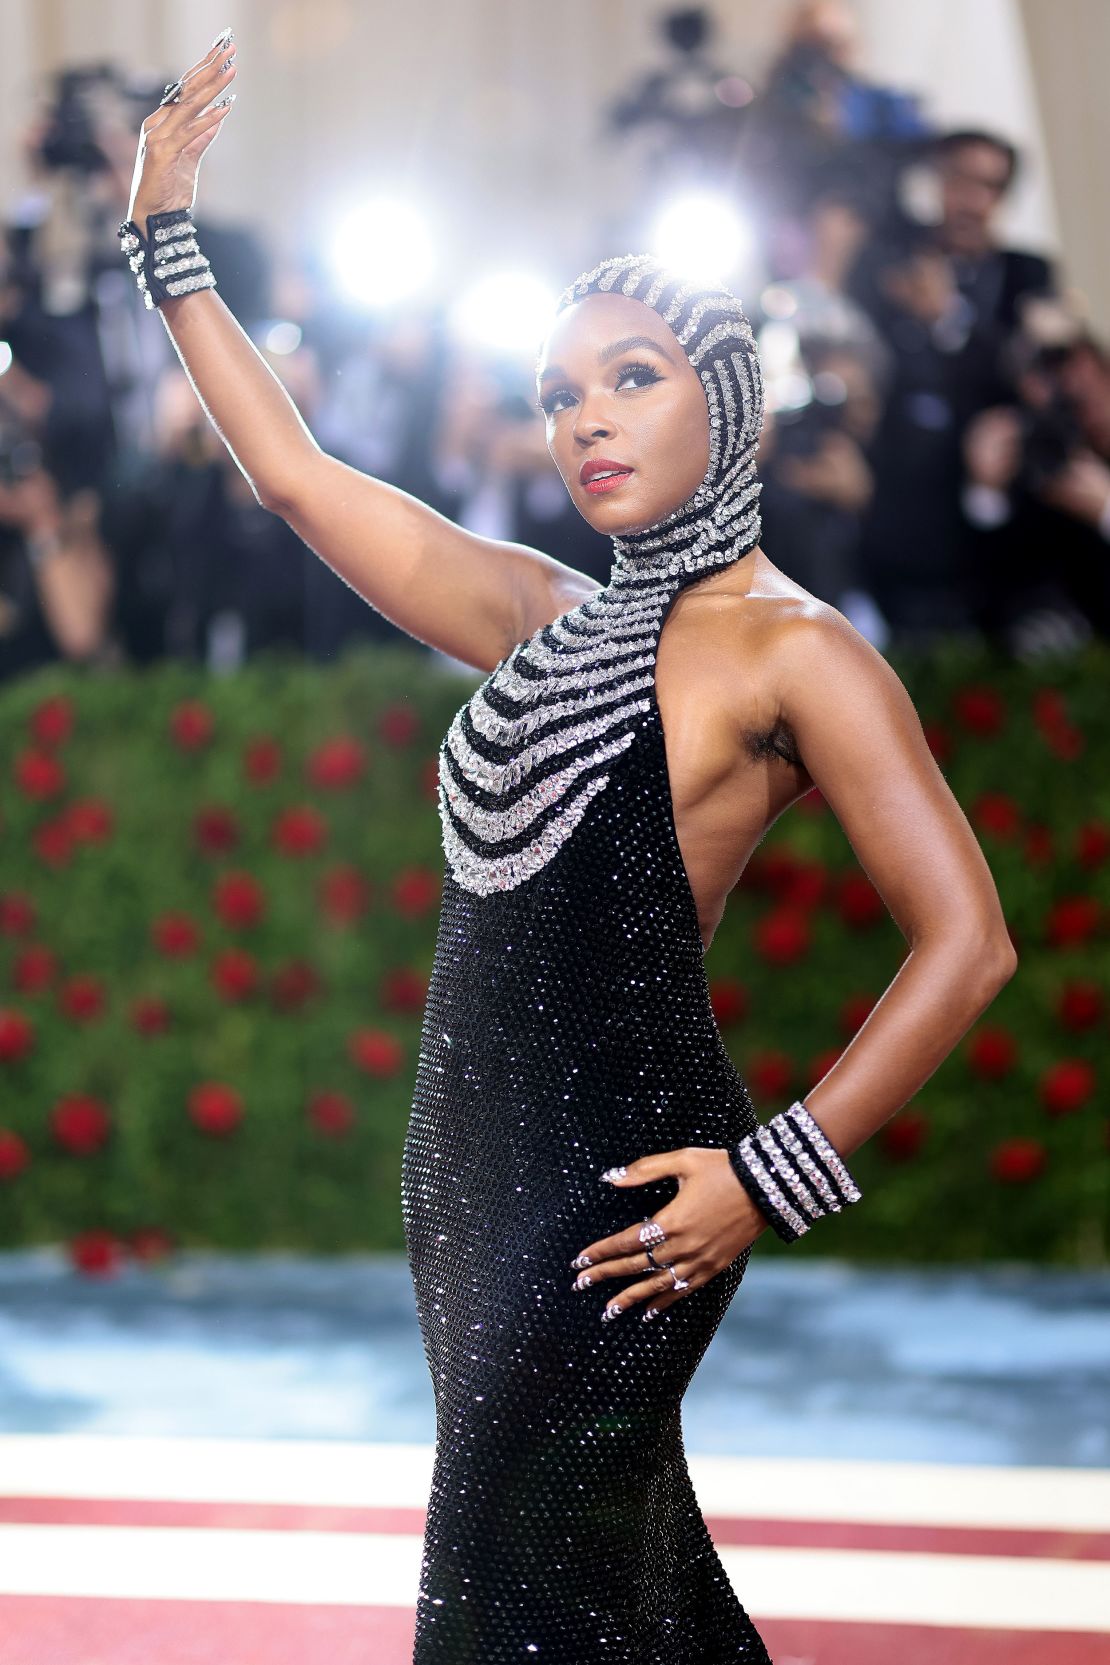 While many celebrities opted for tiaras, singer Janelle Monáe went for a full glimmering gown with a full blinged-out headpiece and matching wrist cuffs.